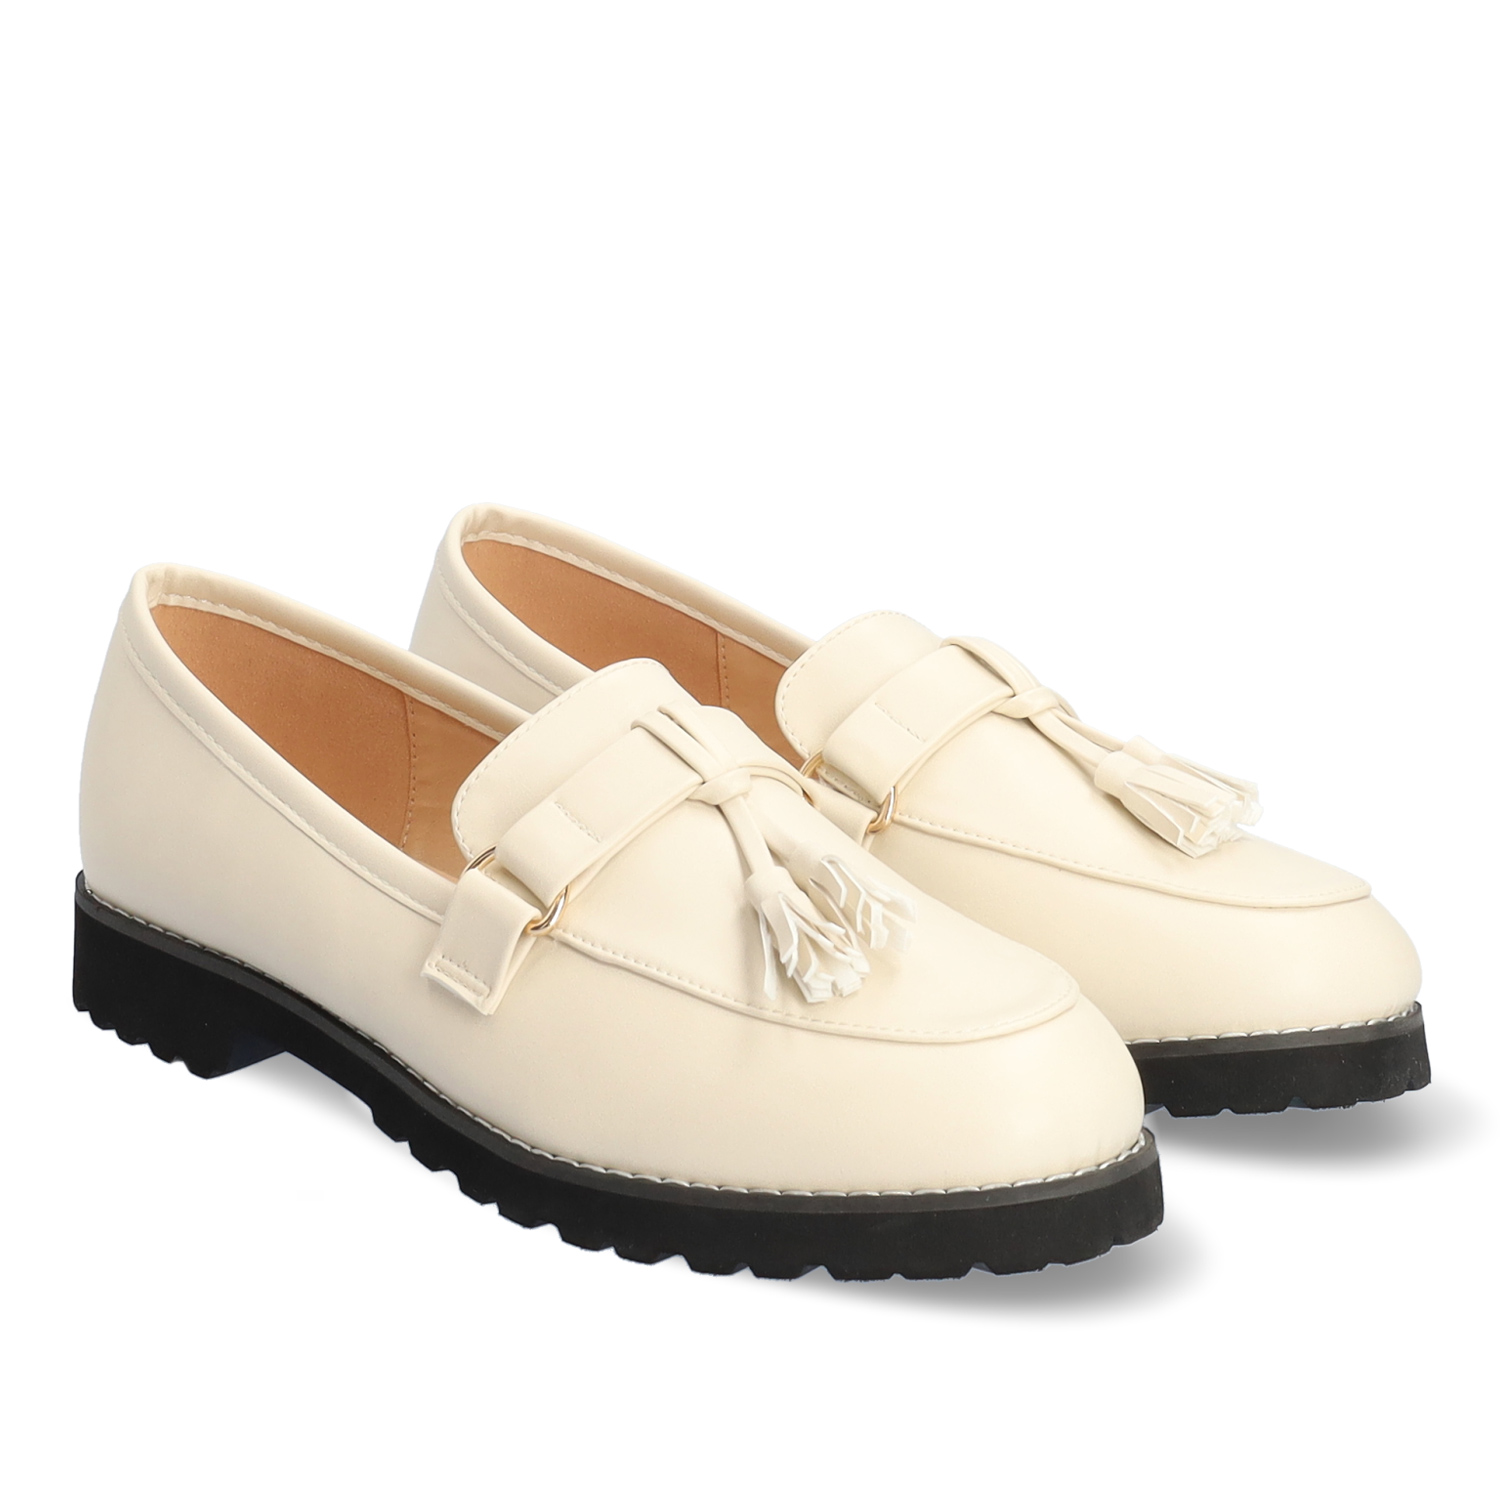 Moccasins in ivory colored faux leather and tassle 